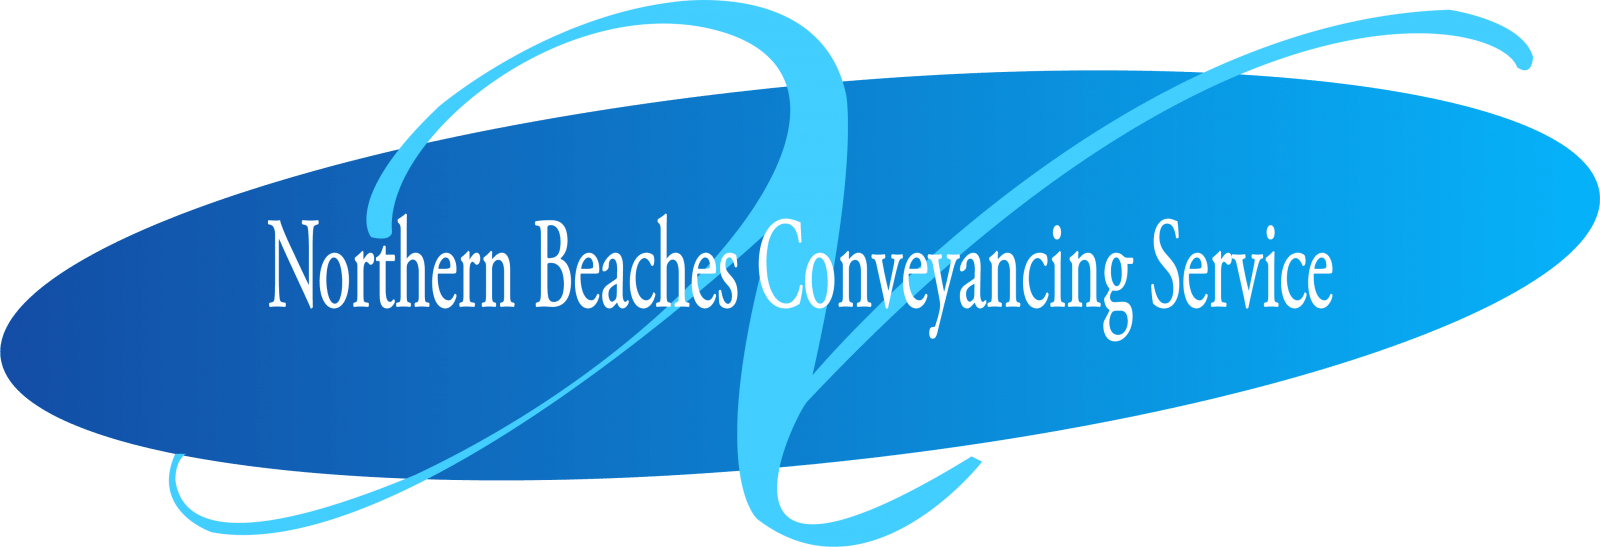 Northern Beaches Conveyancing